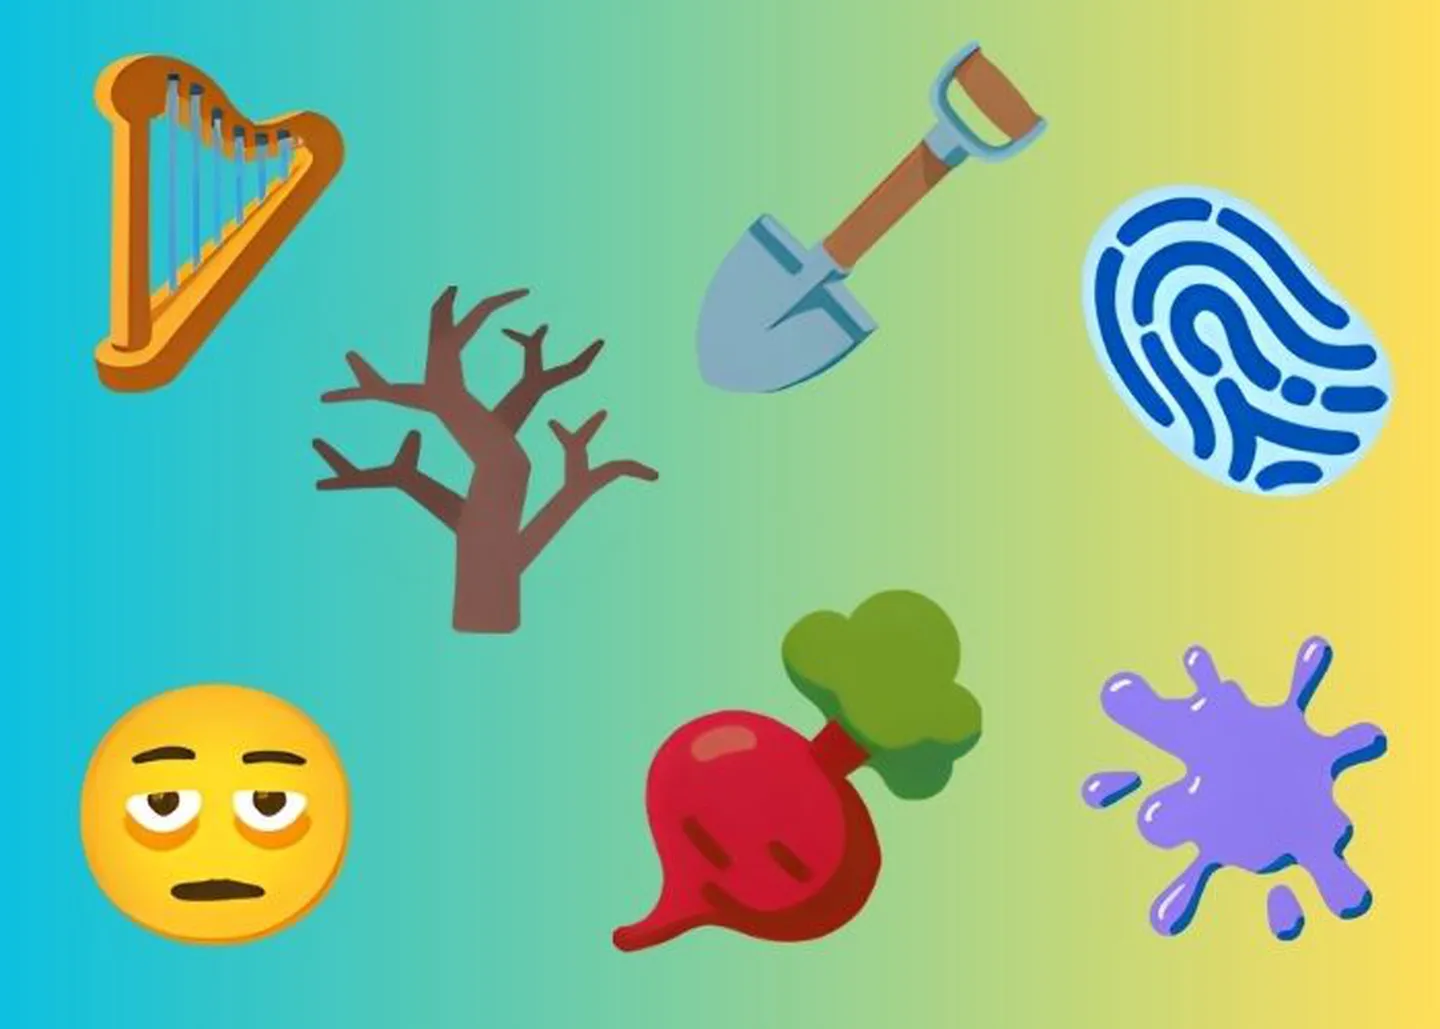 Unicode proposes seven new emojis for devices